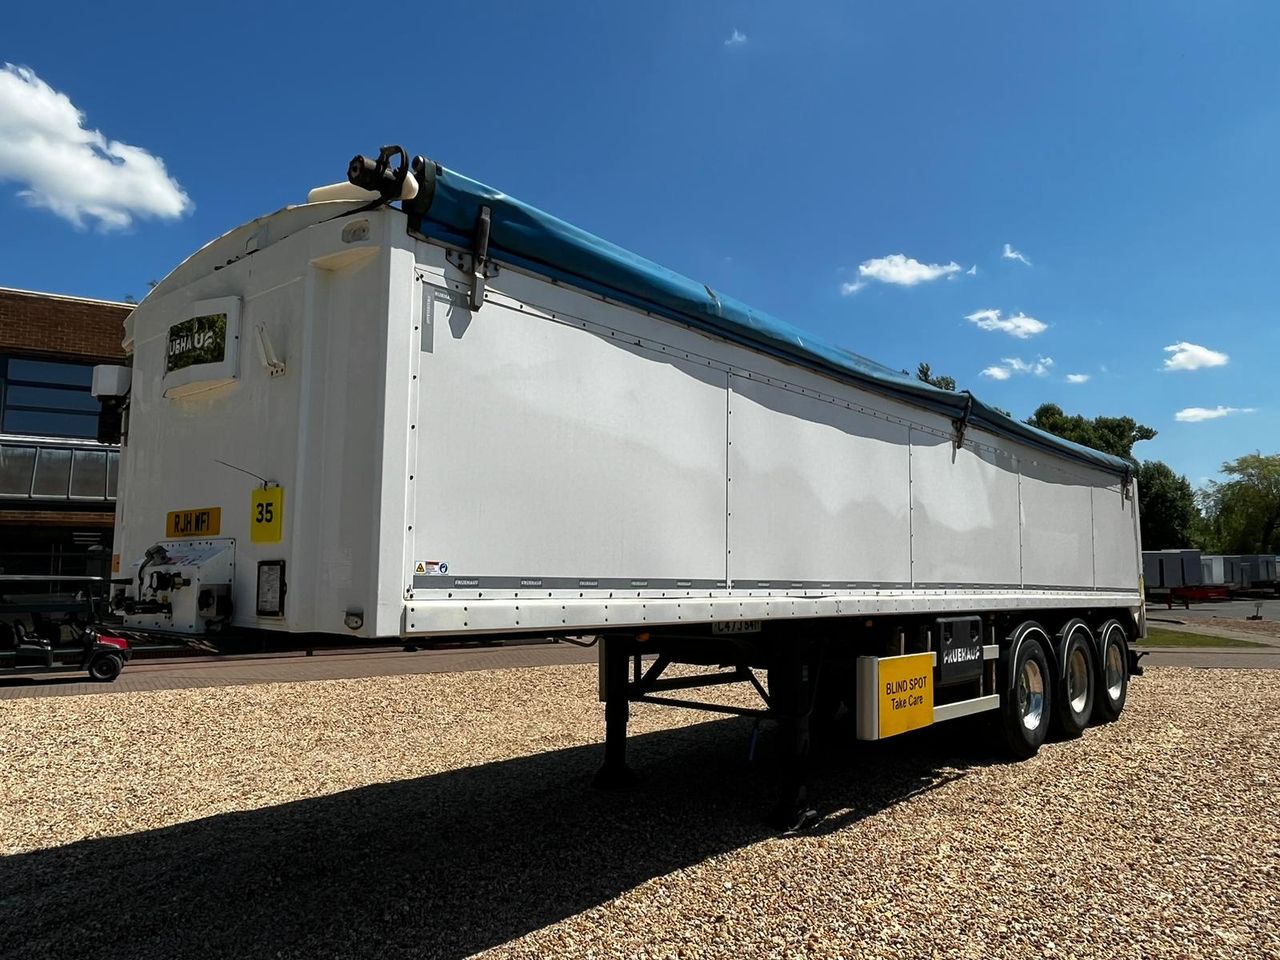 Ready to go Fruehauf Walking floor trailer, Trailers, , 39t, -, -, Sheeting System, Walking Floor, Chapter 8 Markings, Automatic Tailgate, Toolbox, , -, - | for sale at MV Commercial, the UKs leading Truck, Trailers and Van supplier. (C473541 102479)